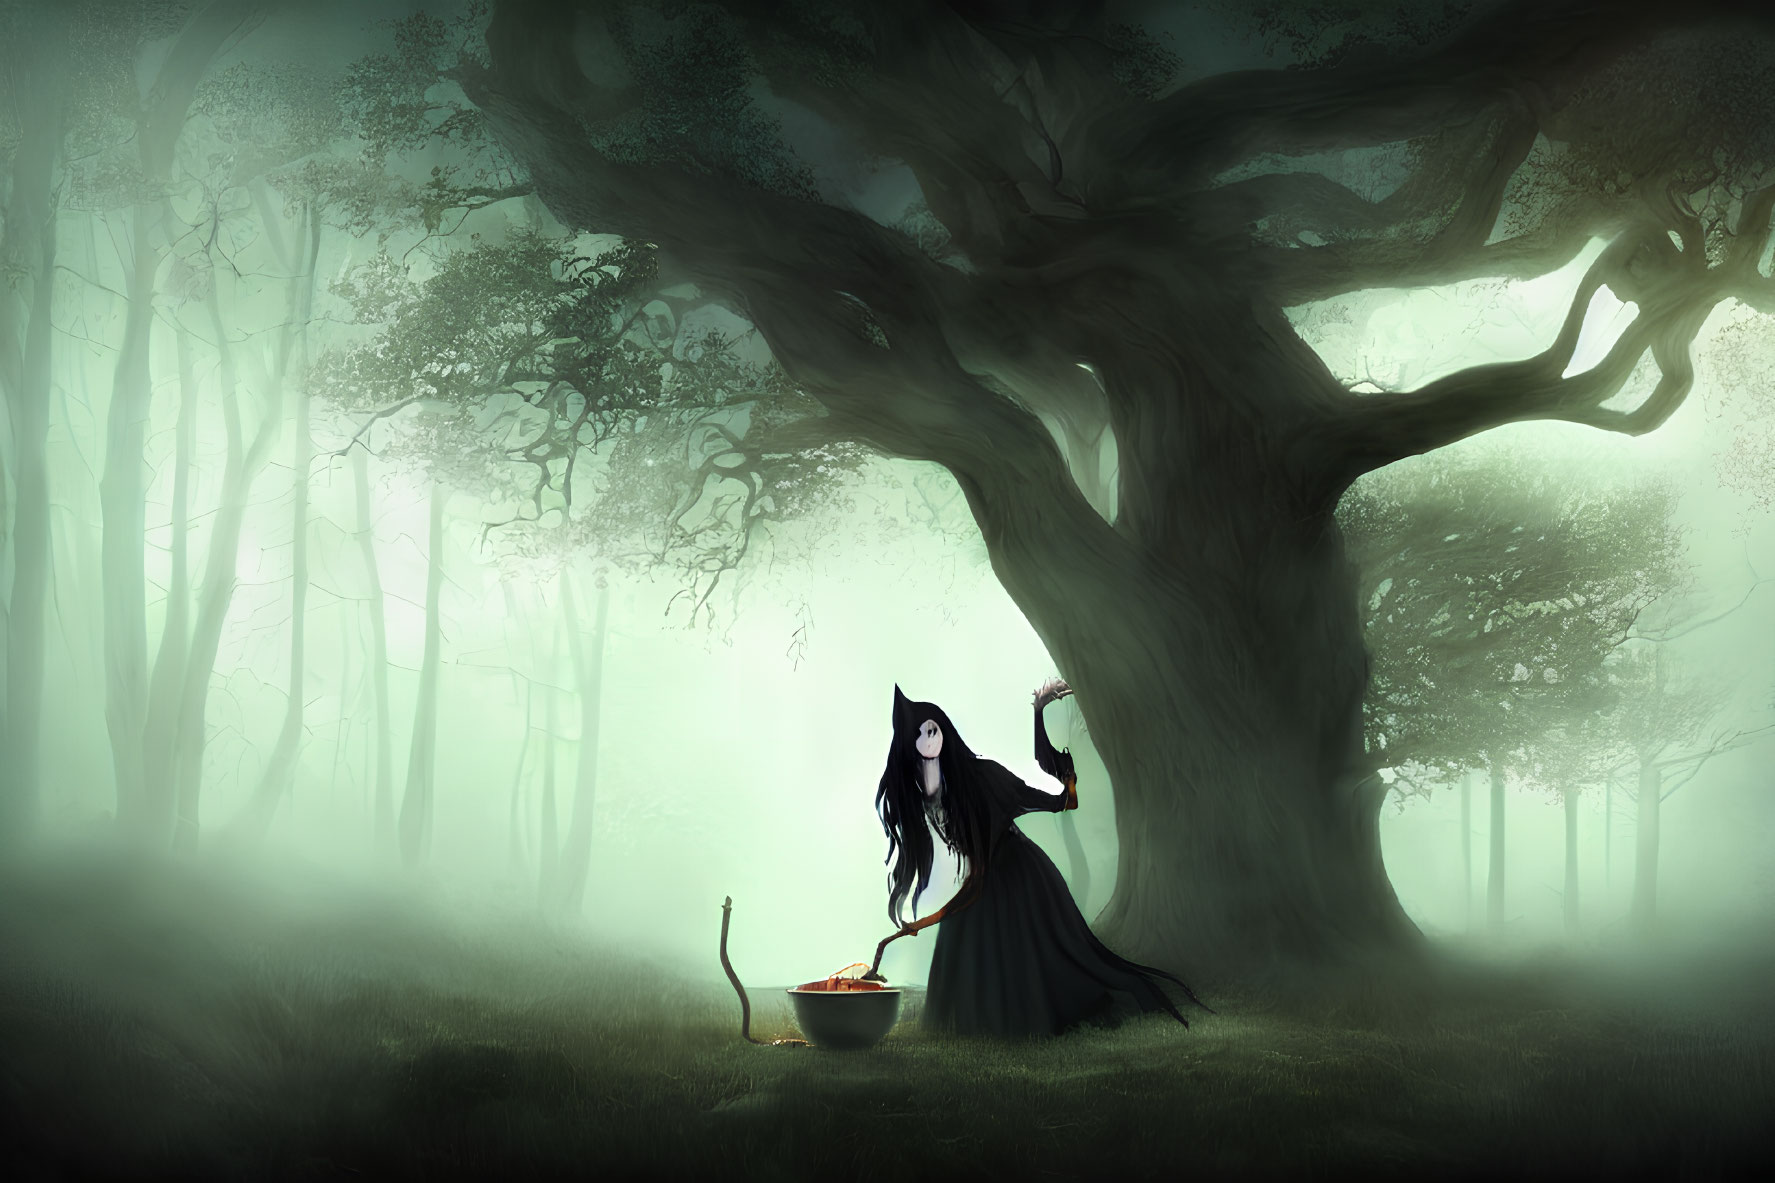 Mysterious Figure Stirring Cauldron in Ethereal Forest